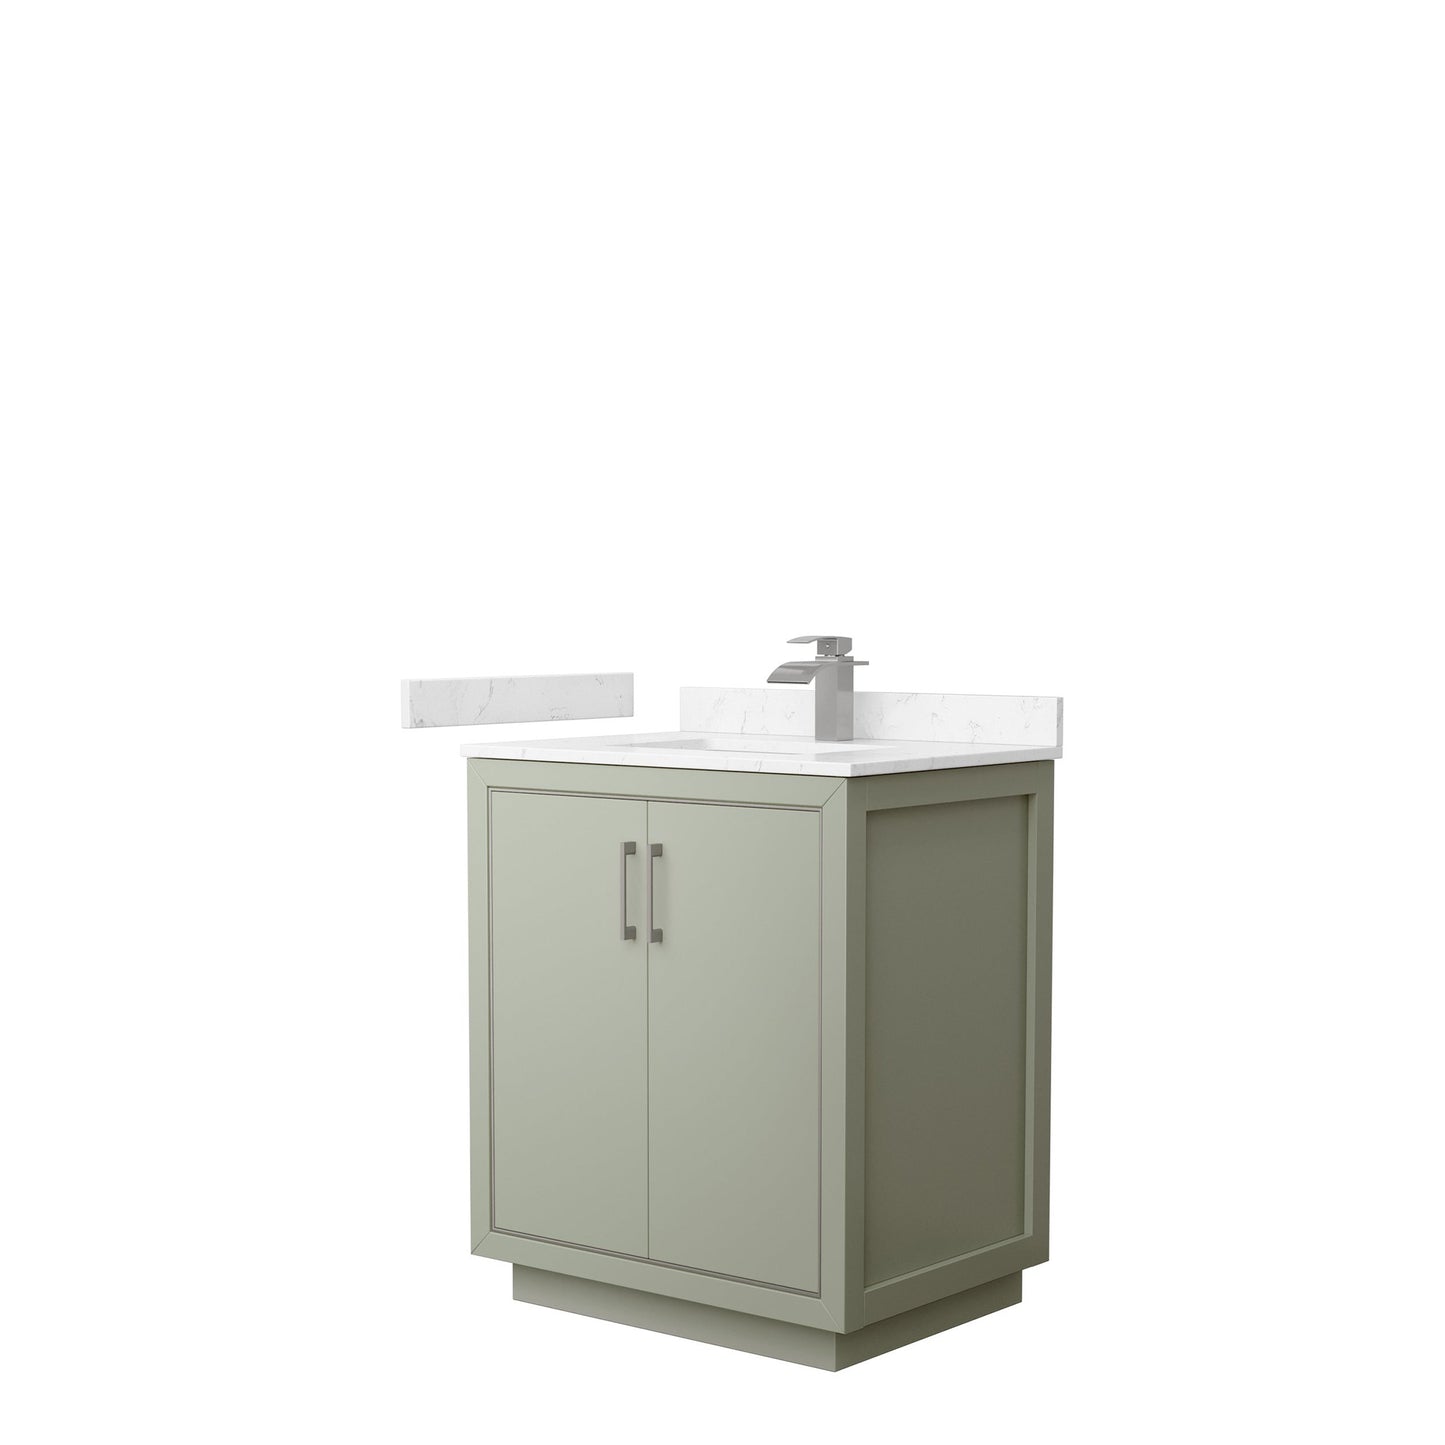 Wyndham Collection Icon 30" Single Bathroom Vanity in Light Green, Carrara Cultured Marble Countertop, Undermount Square Sink, Brushed Nickel Trim